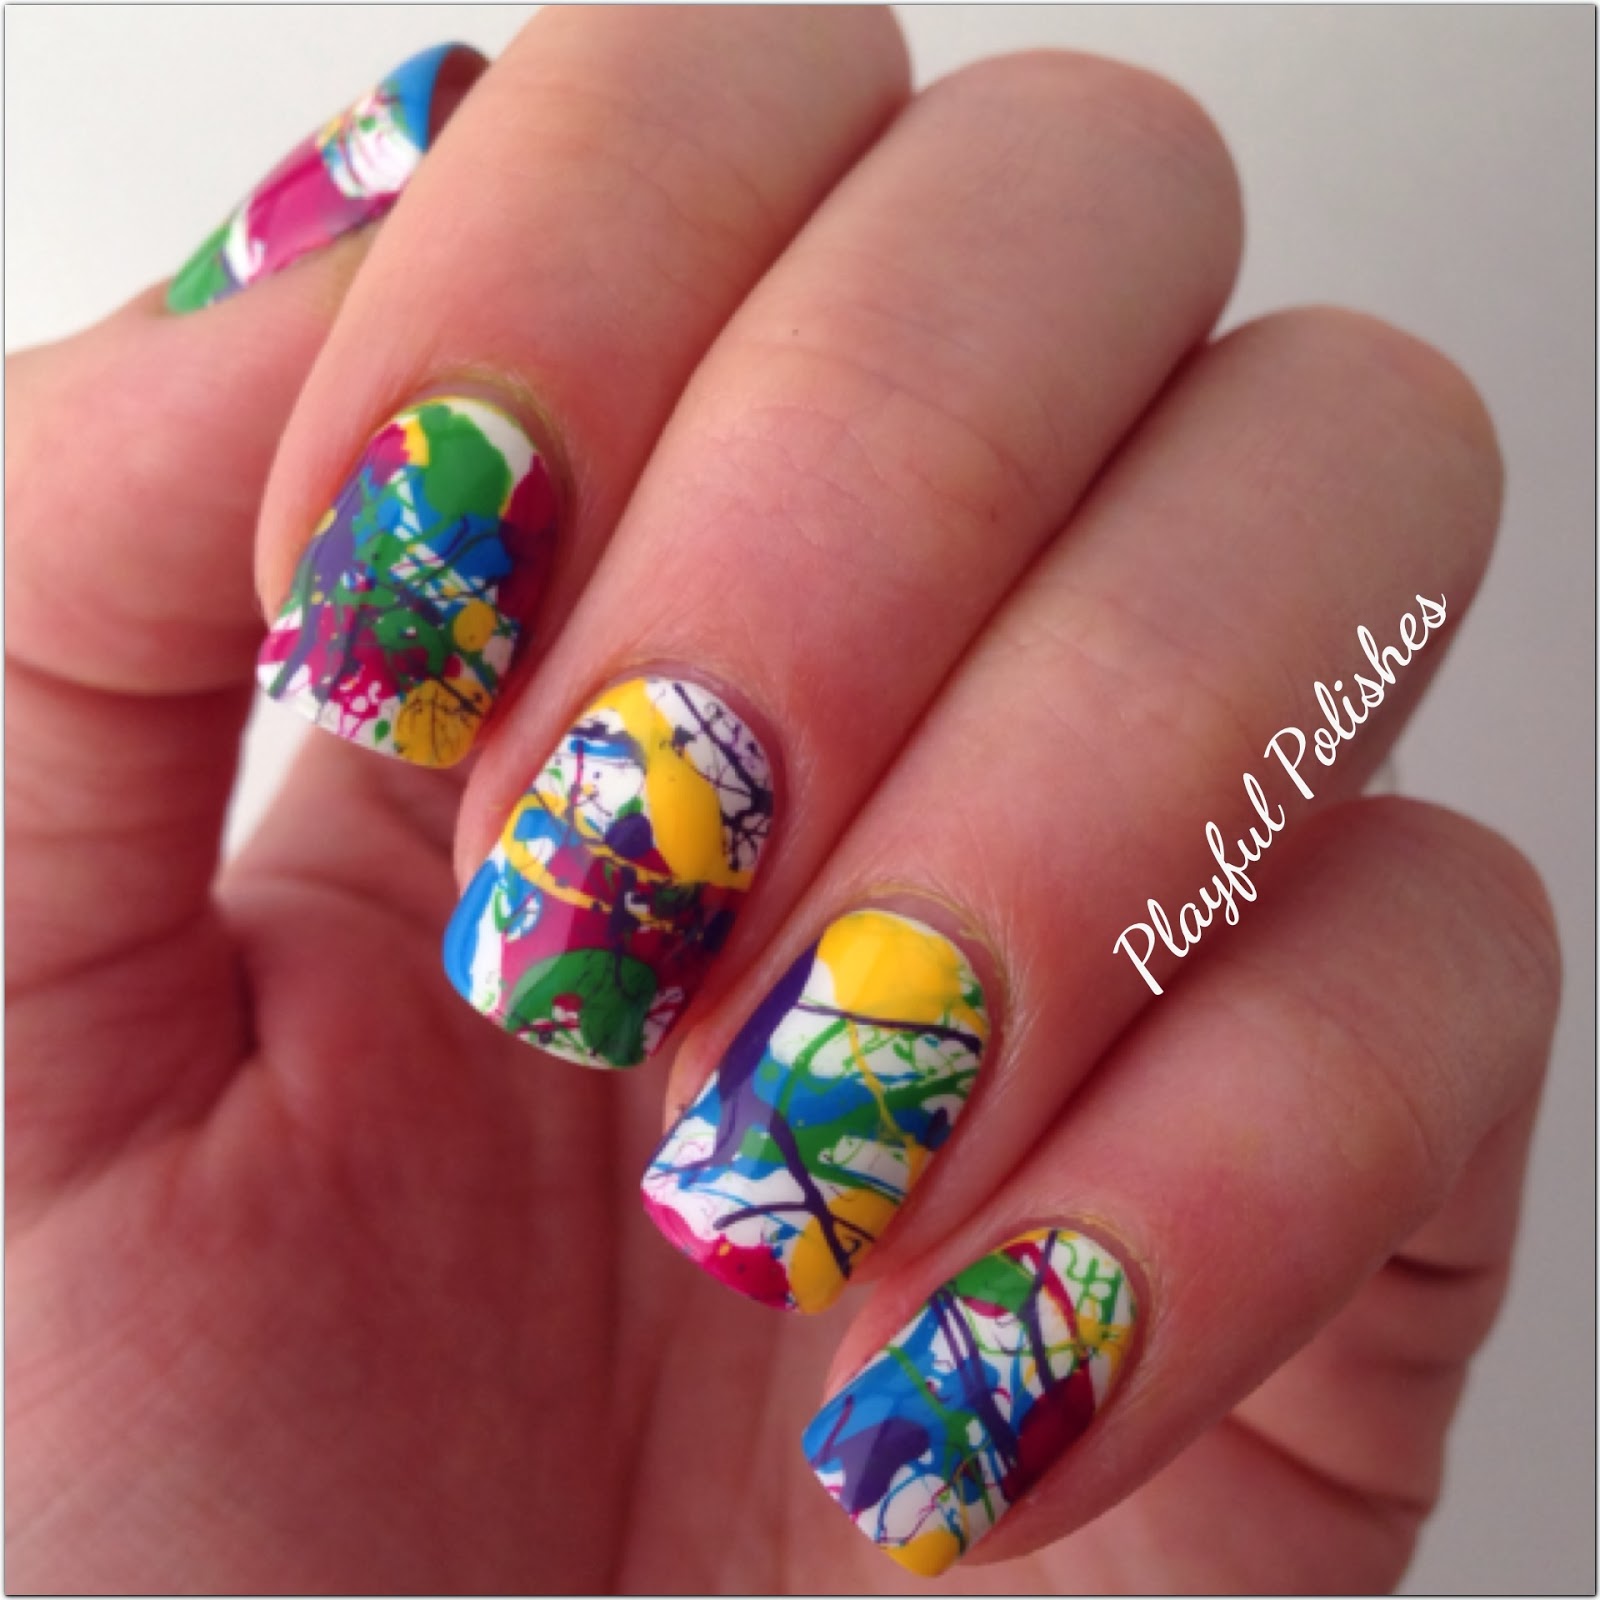 Playful Polishes: 31 DAY NAIL ART CHALLENGE: INSPIRED BY ARTWORK ...